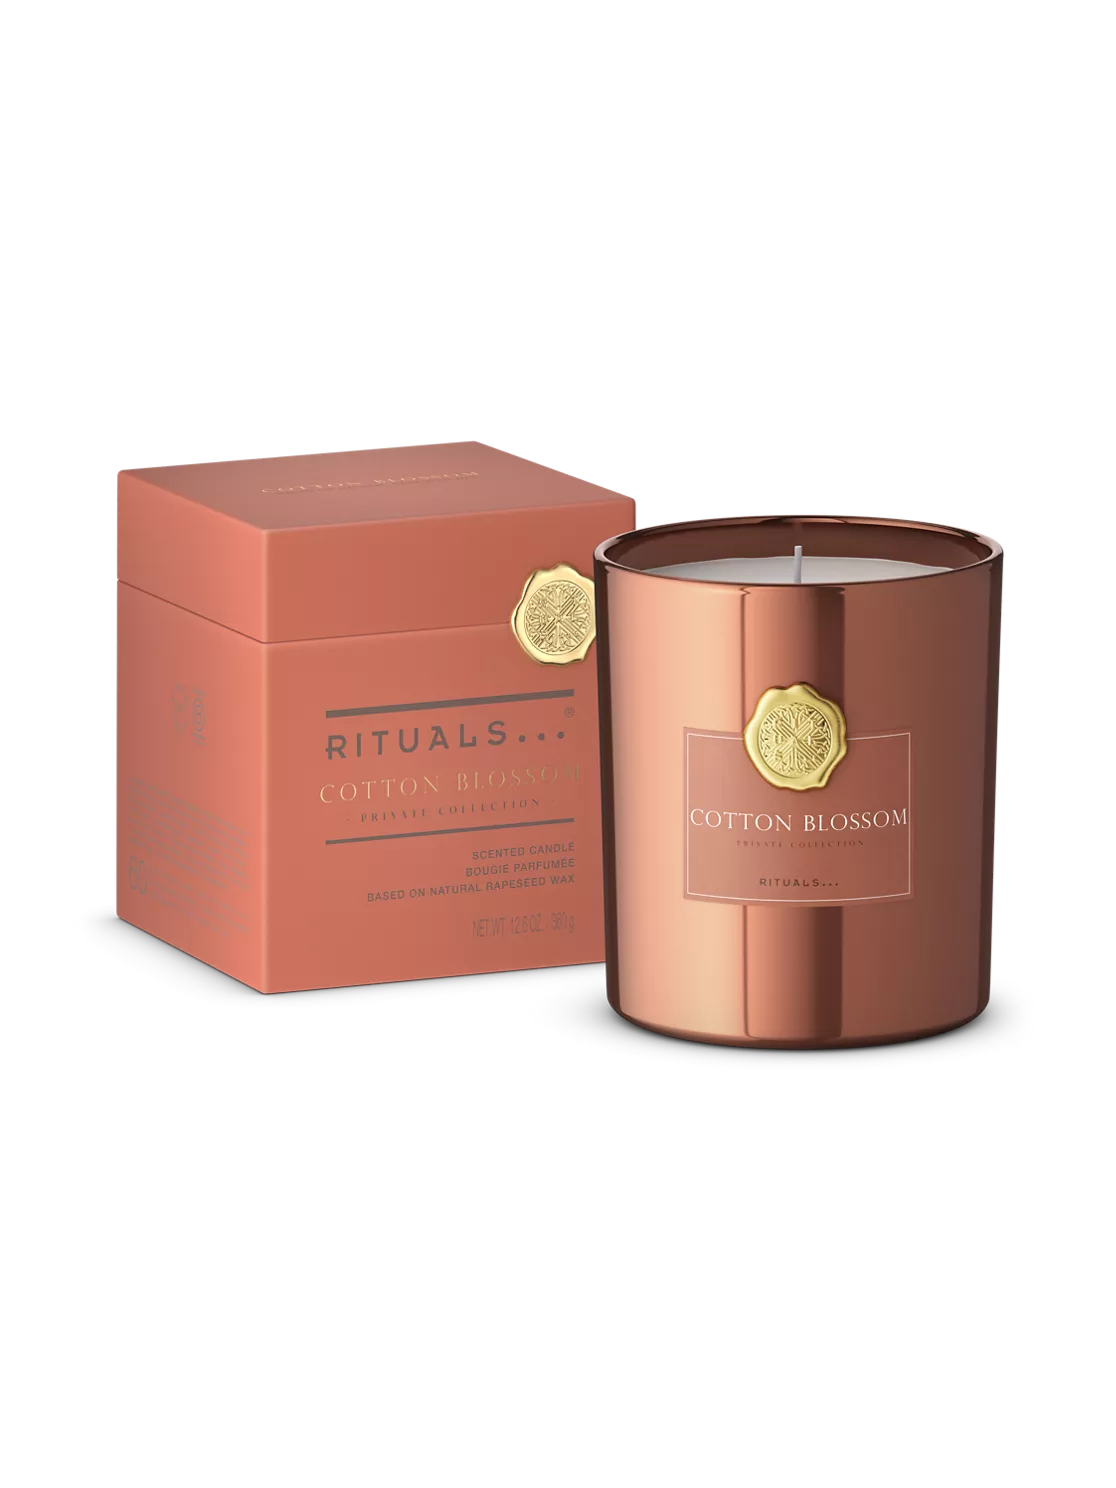 RITUALS® Cotton Blossom - Luxury scented candle